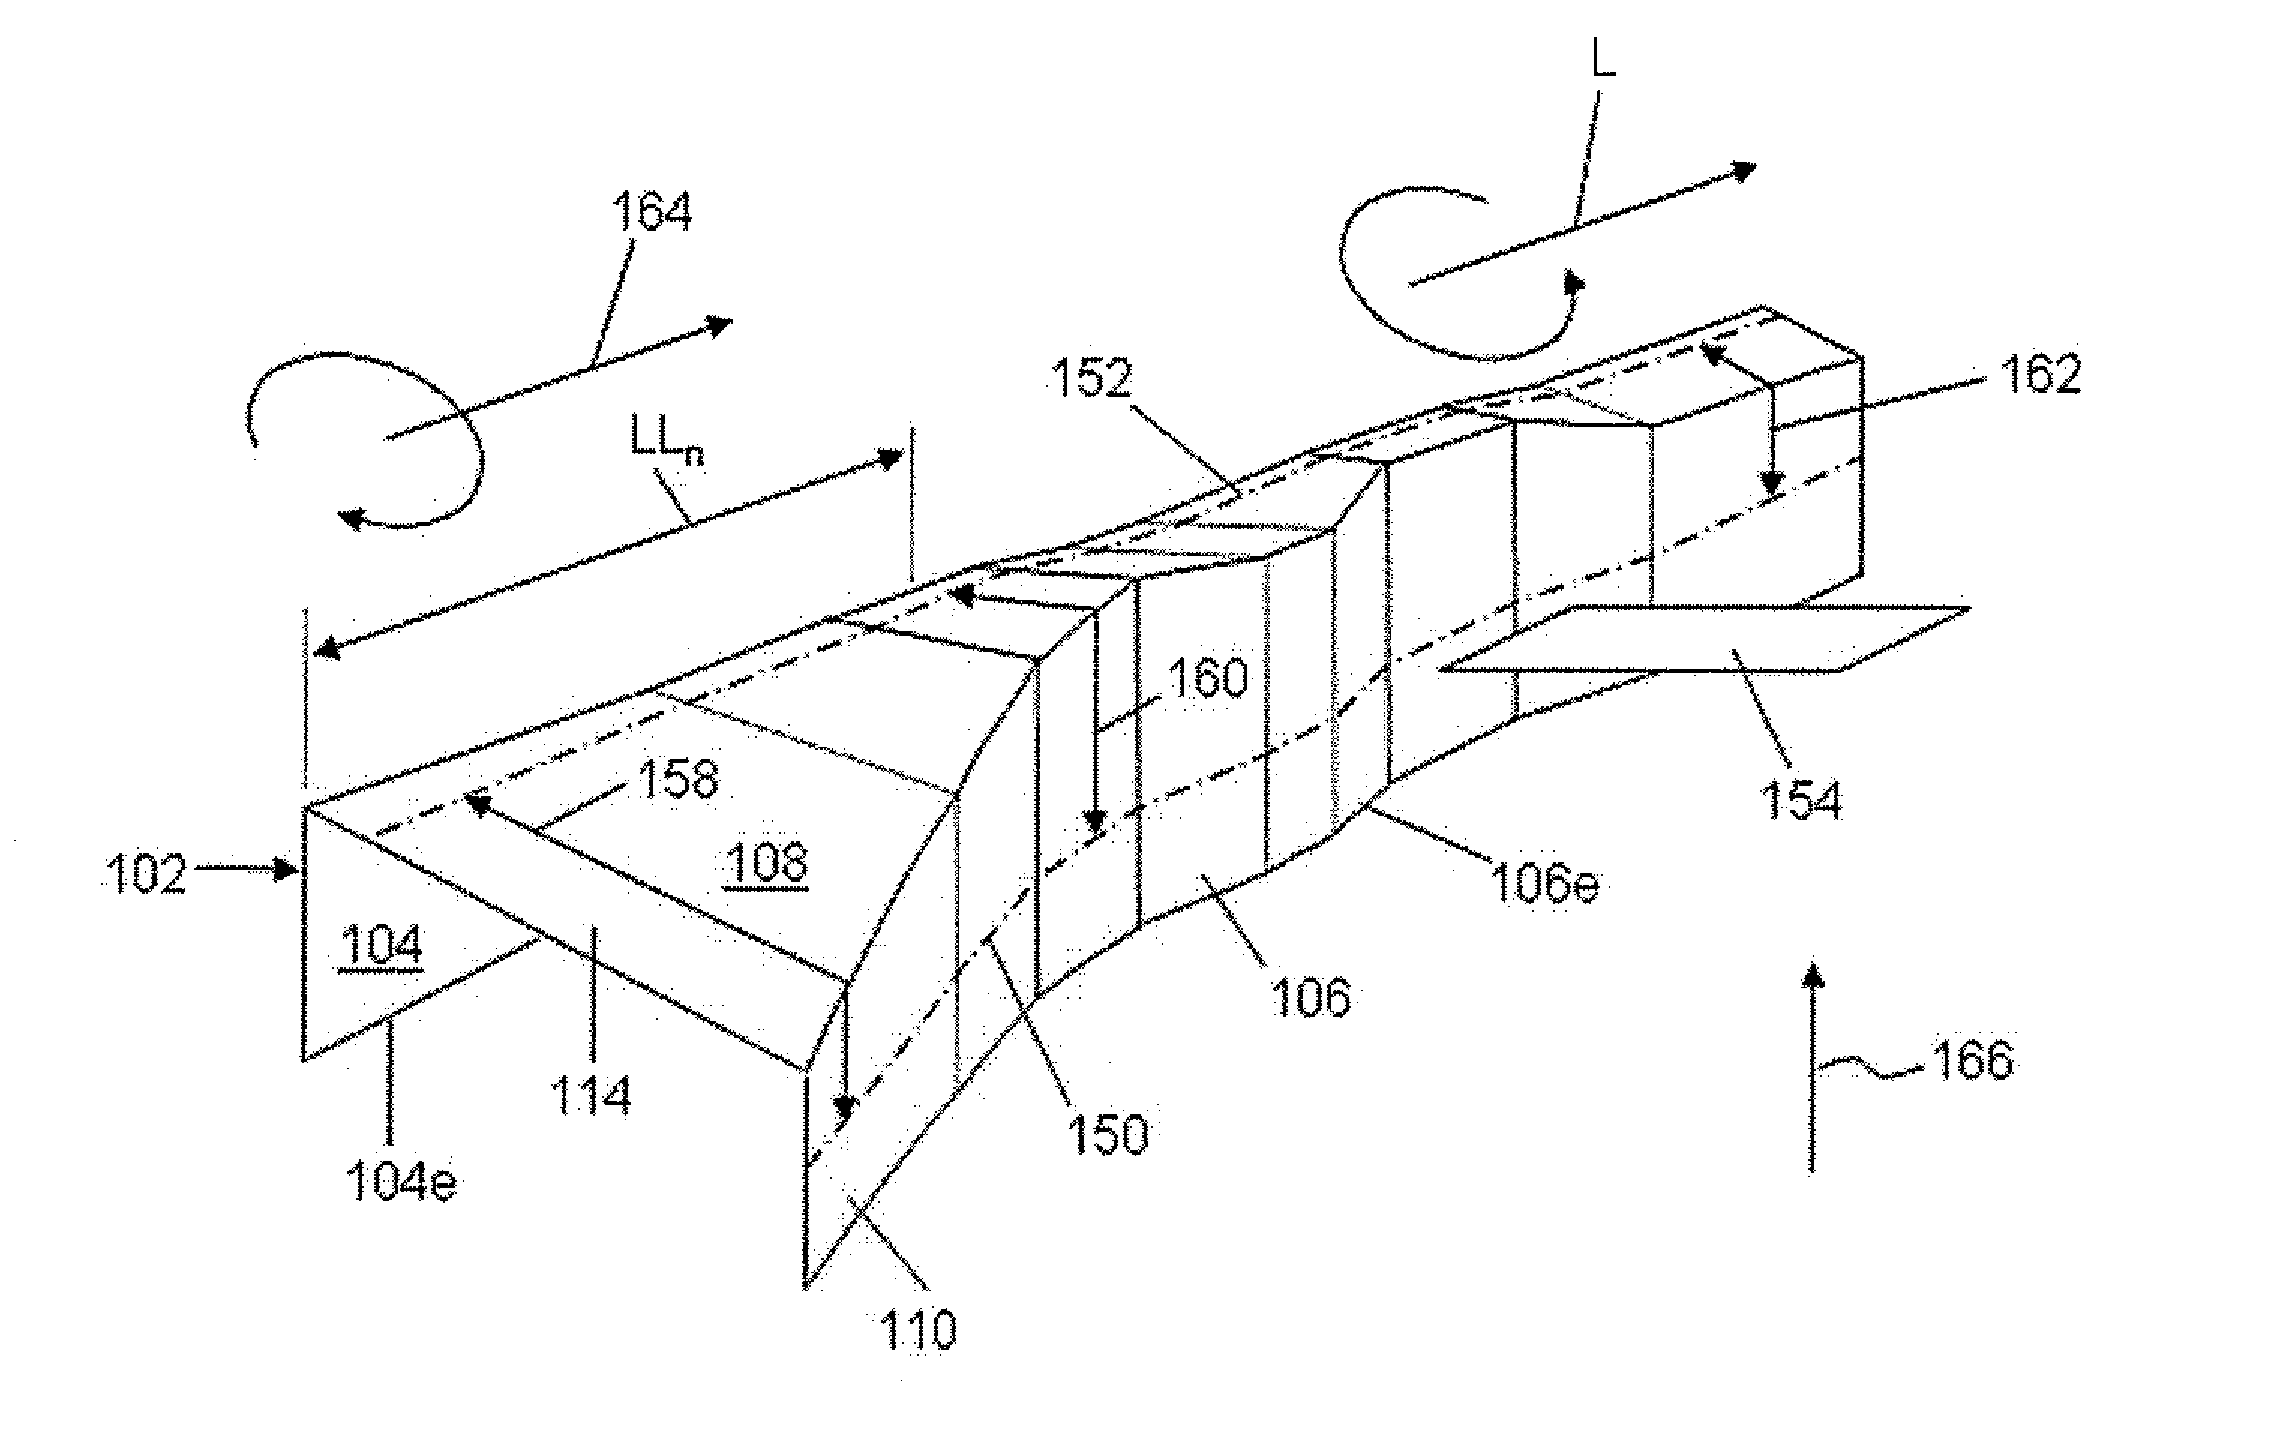 Elongate composite structural members and improvements therein